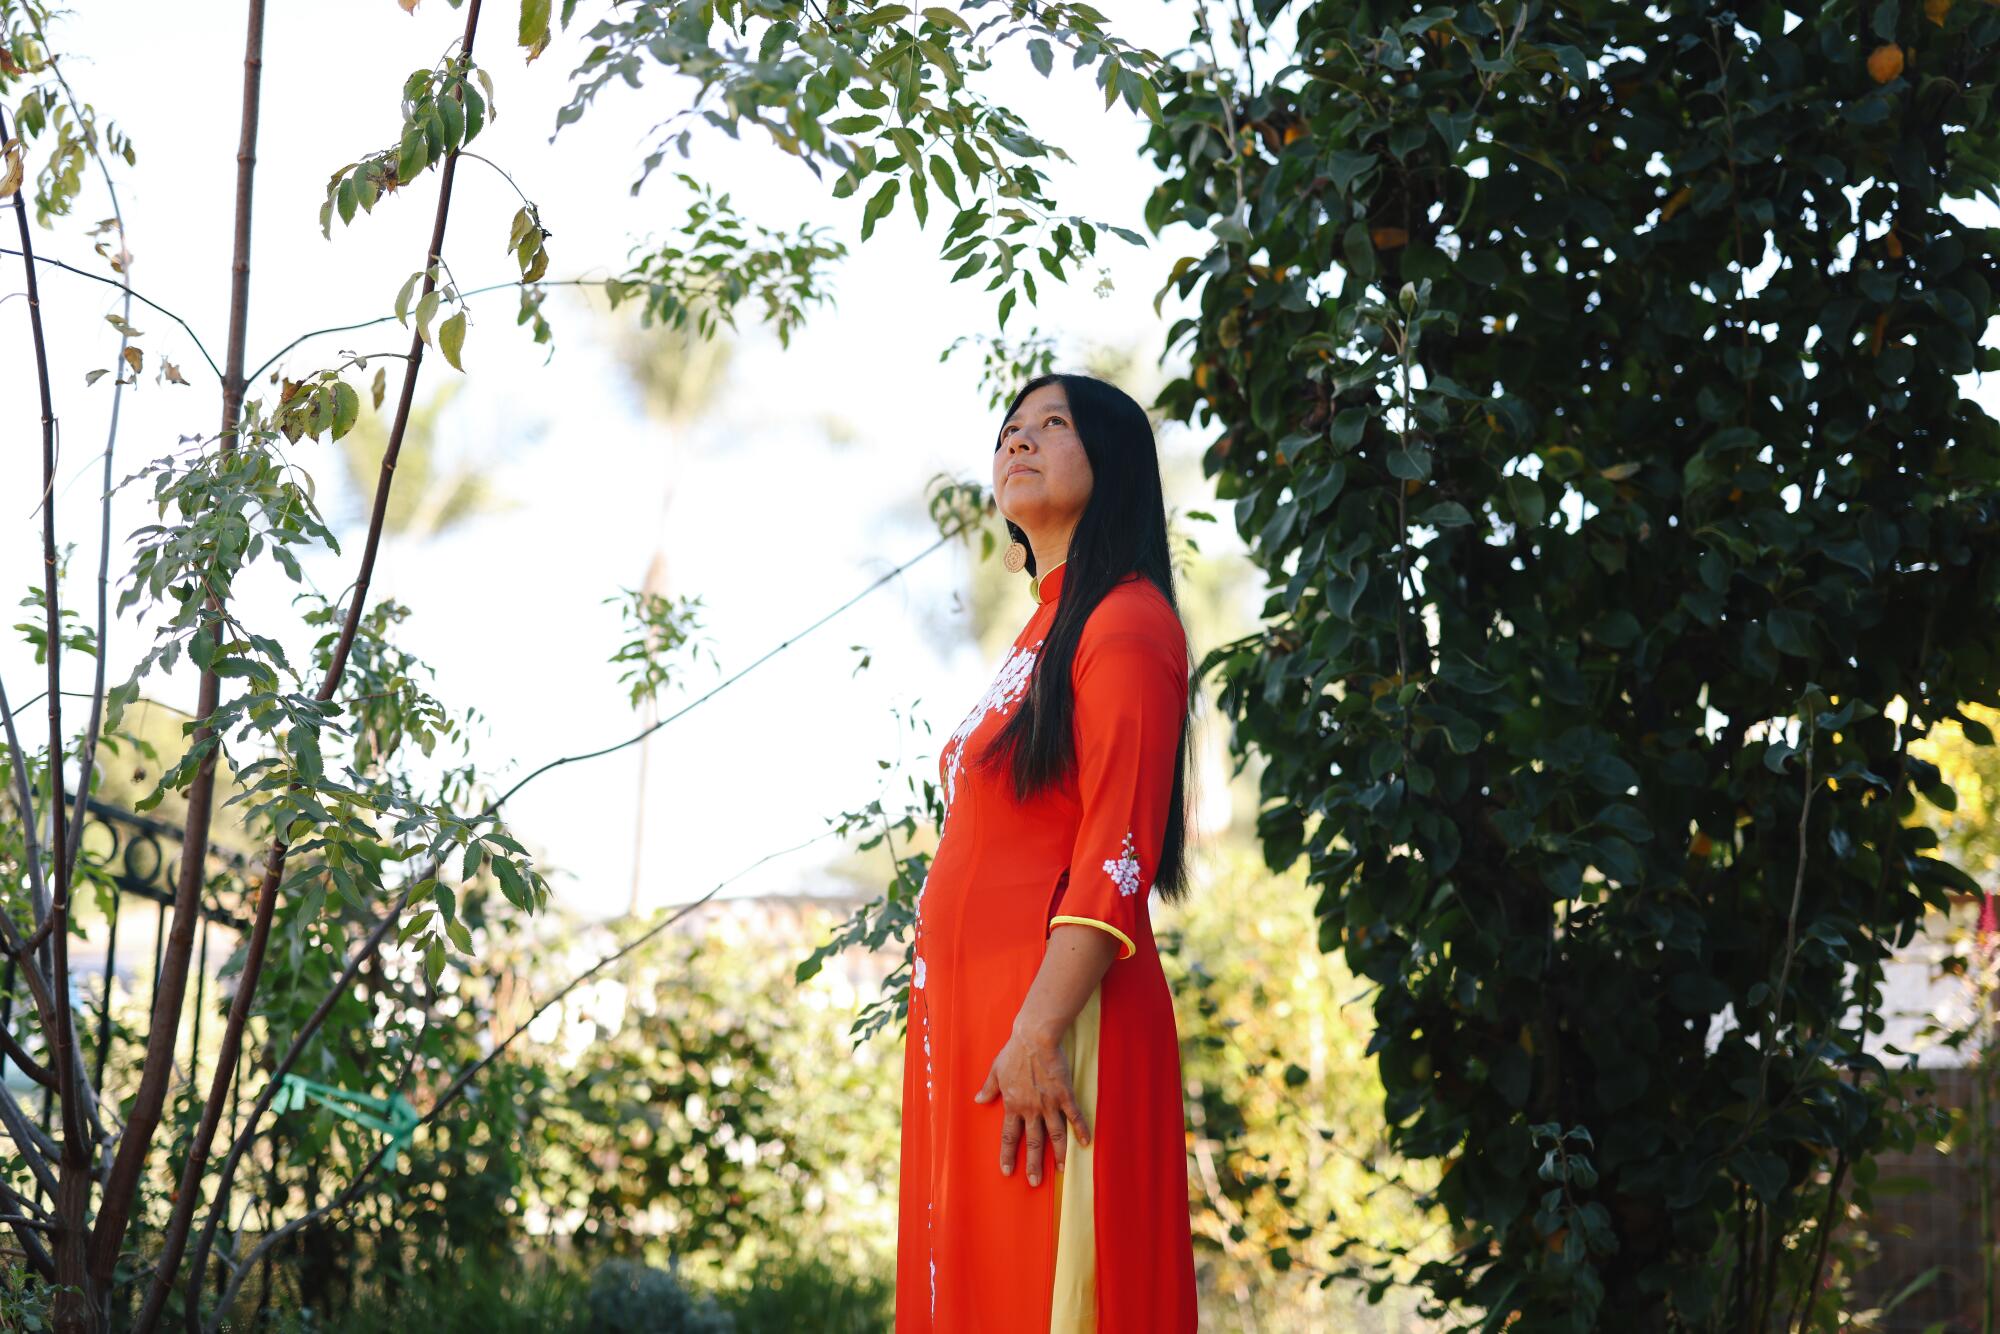 Teresa Mei Chuc stands in a bright red dress amid green trees, looking off into the distance. 